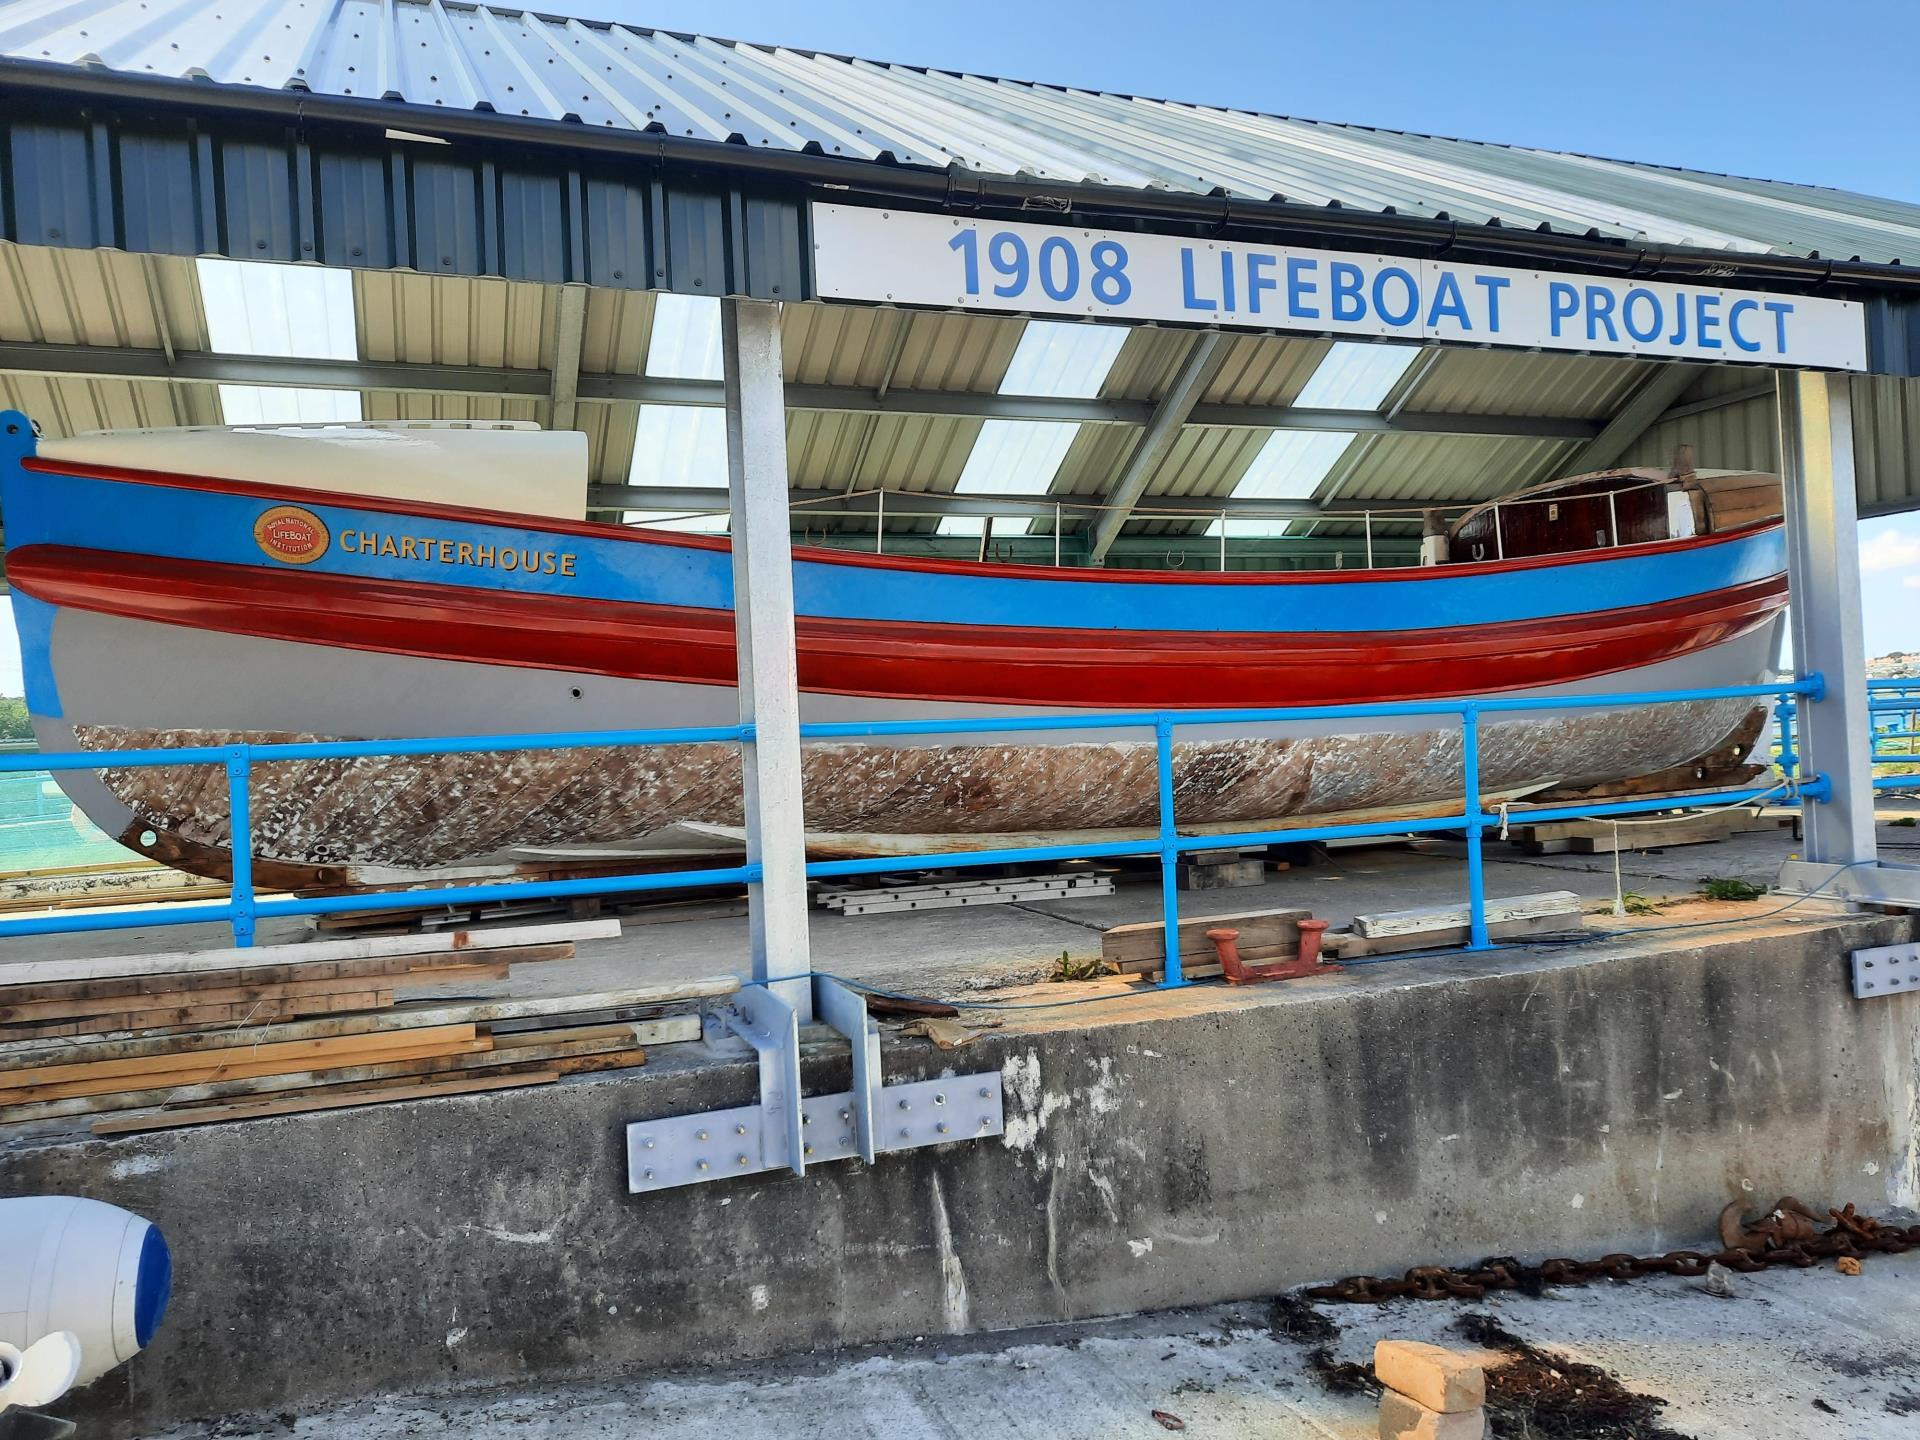 Restoration is progressing nicely on our Lifeboat